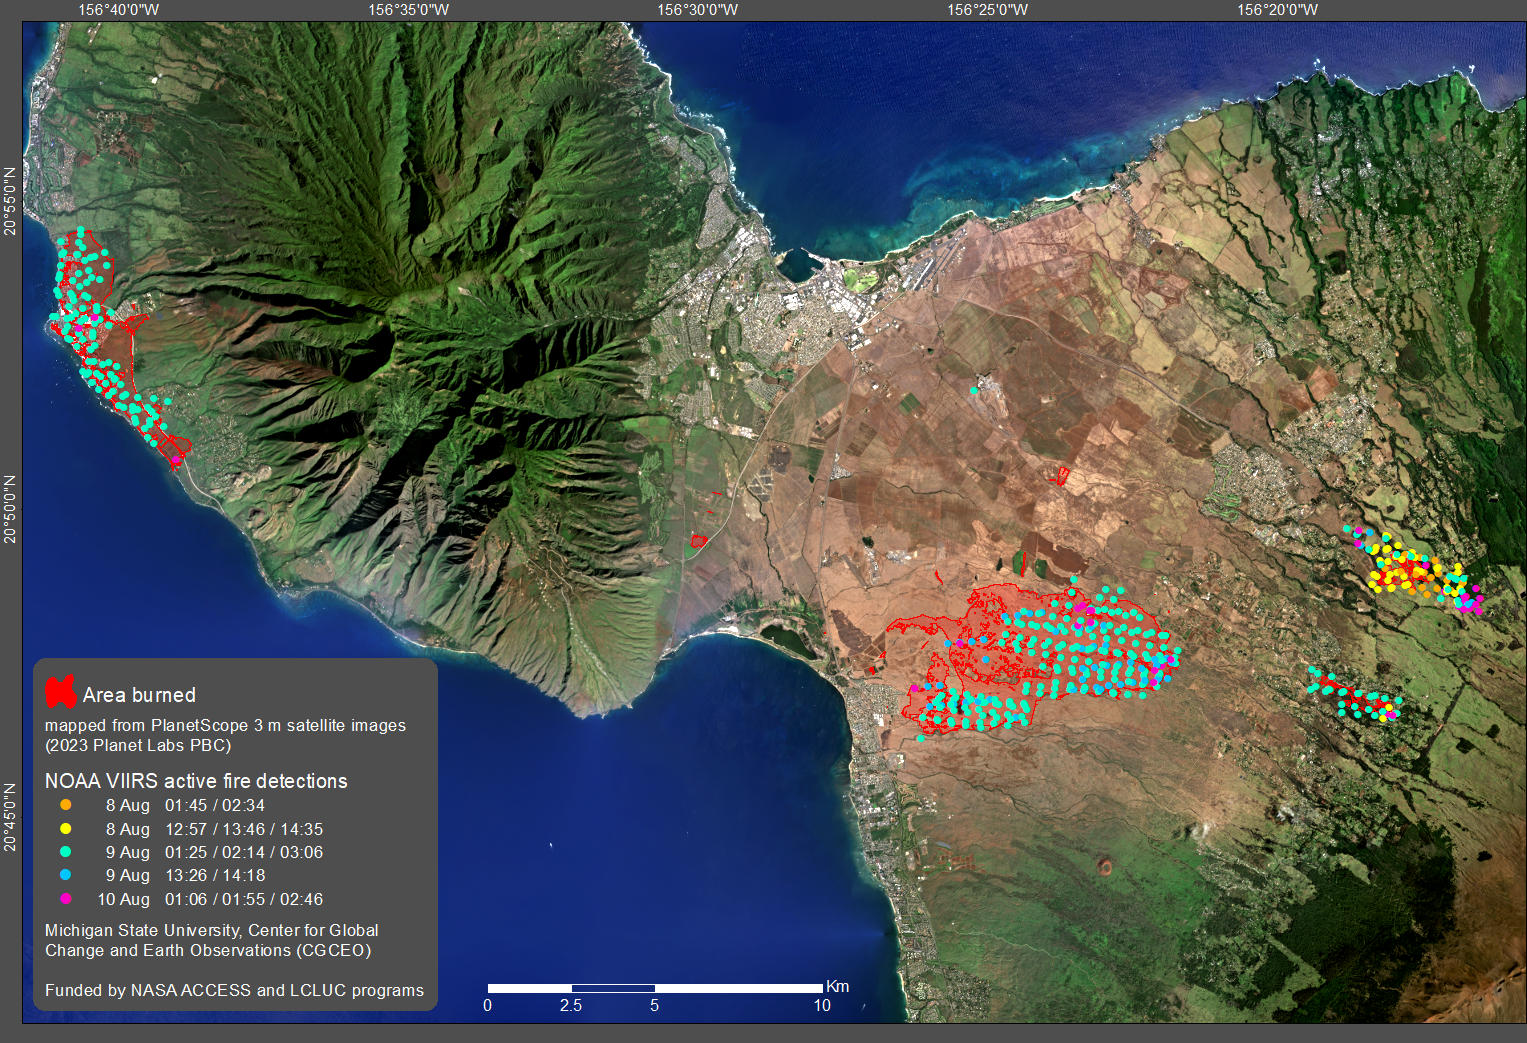 A map of Maui shows places where active fires have been detected using red dots.